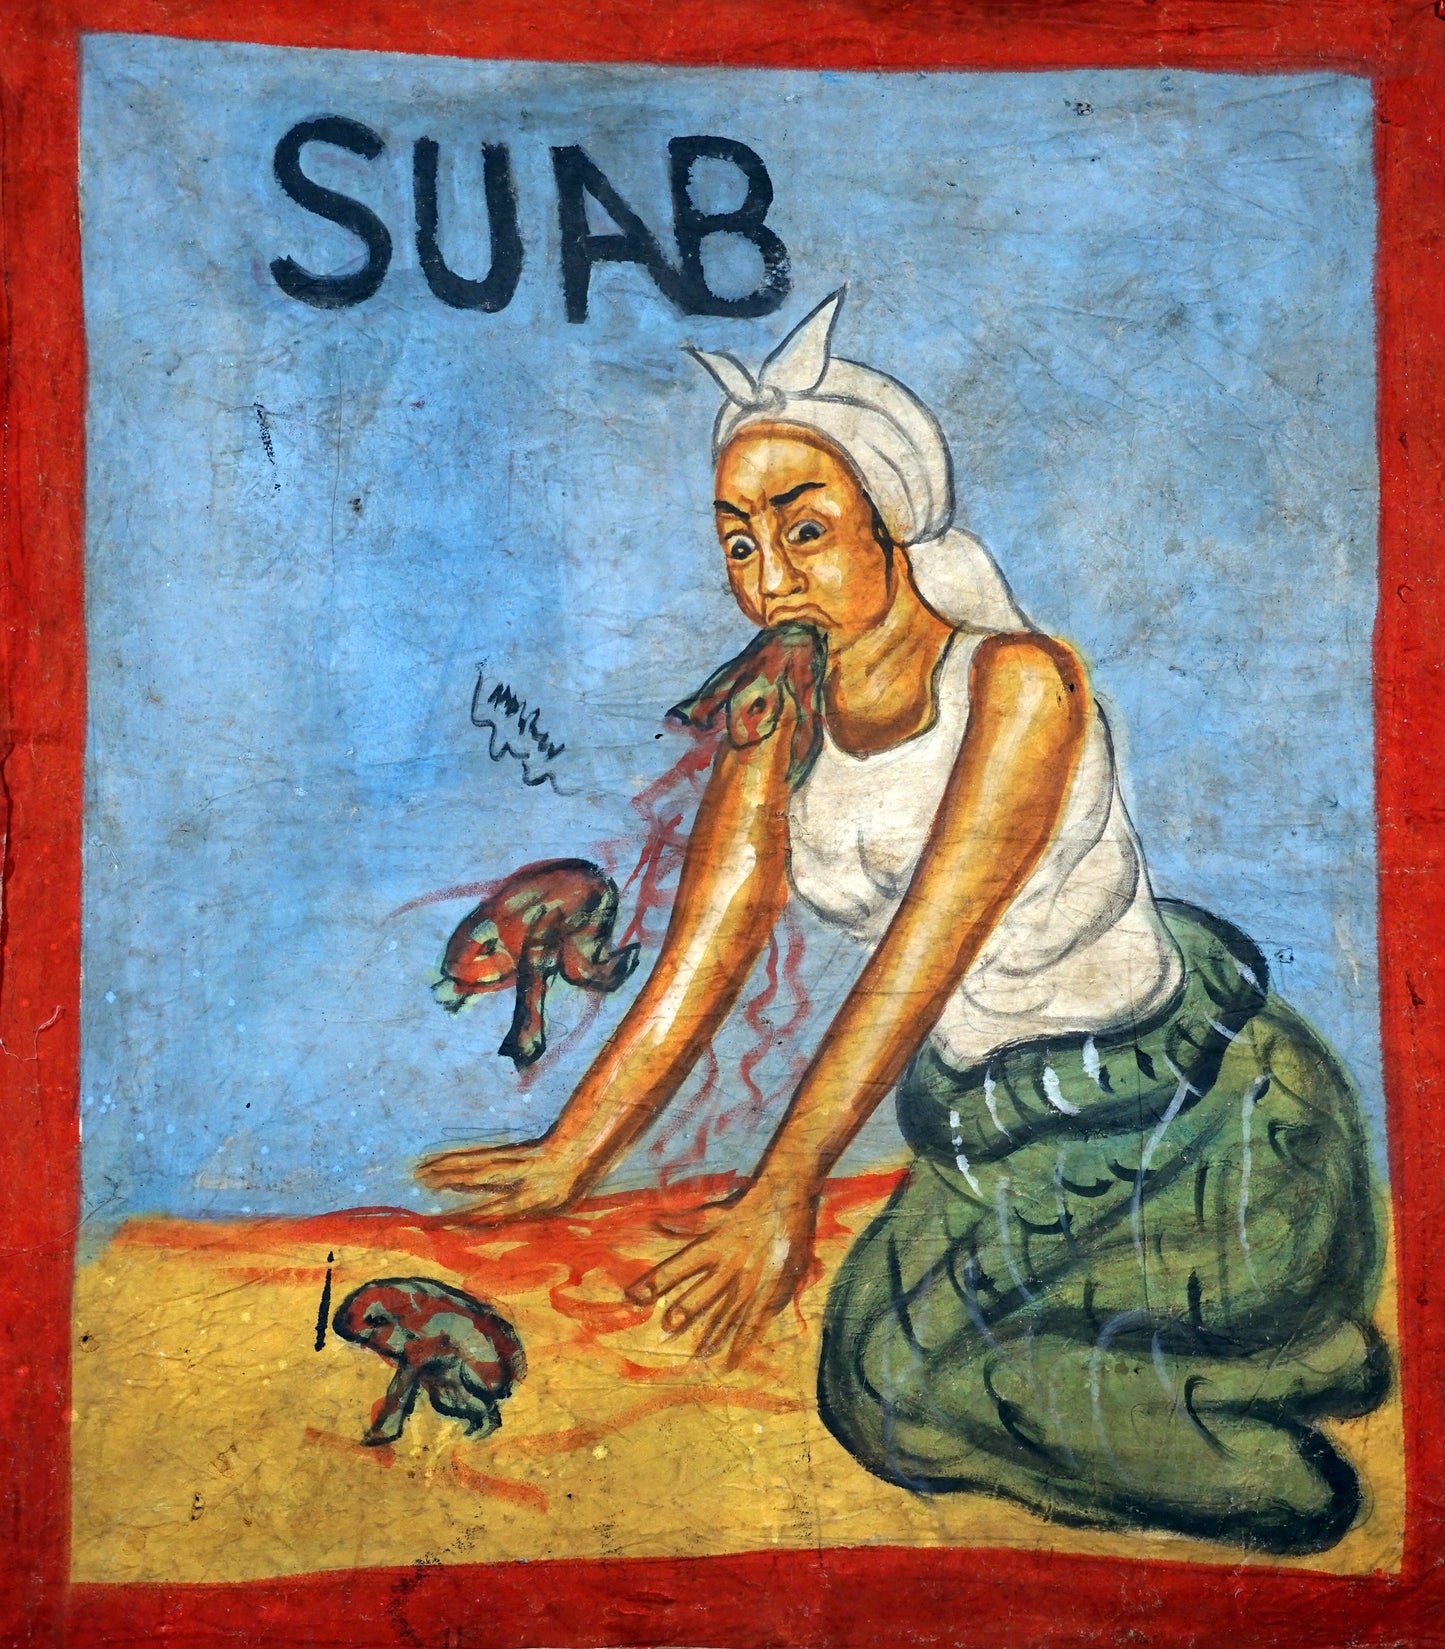 "Suab" by Mr. Brew